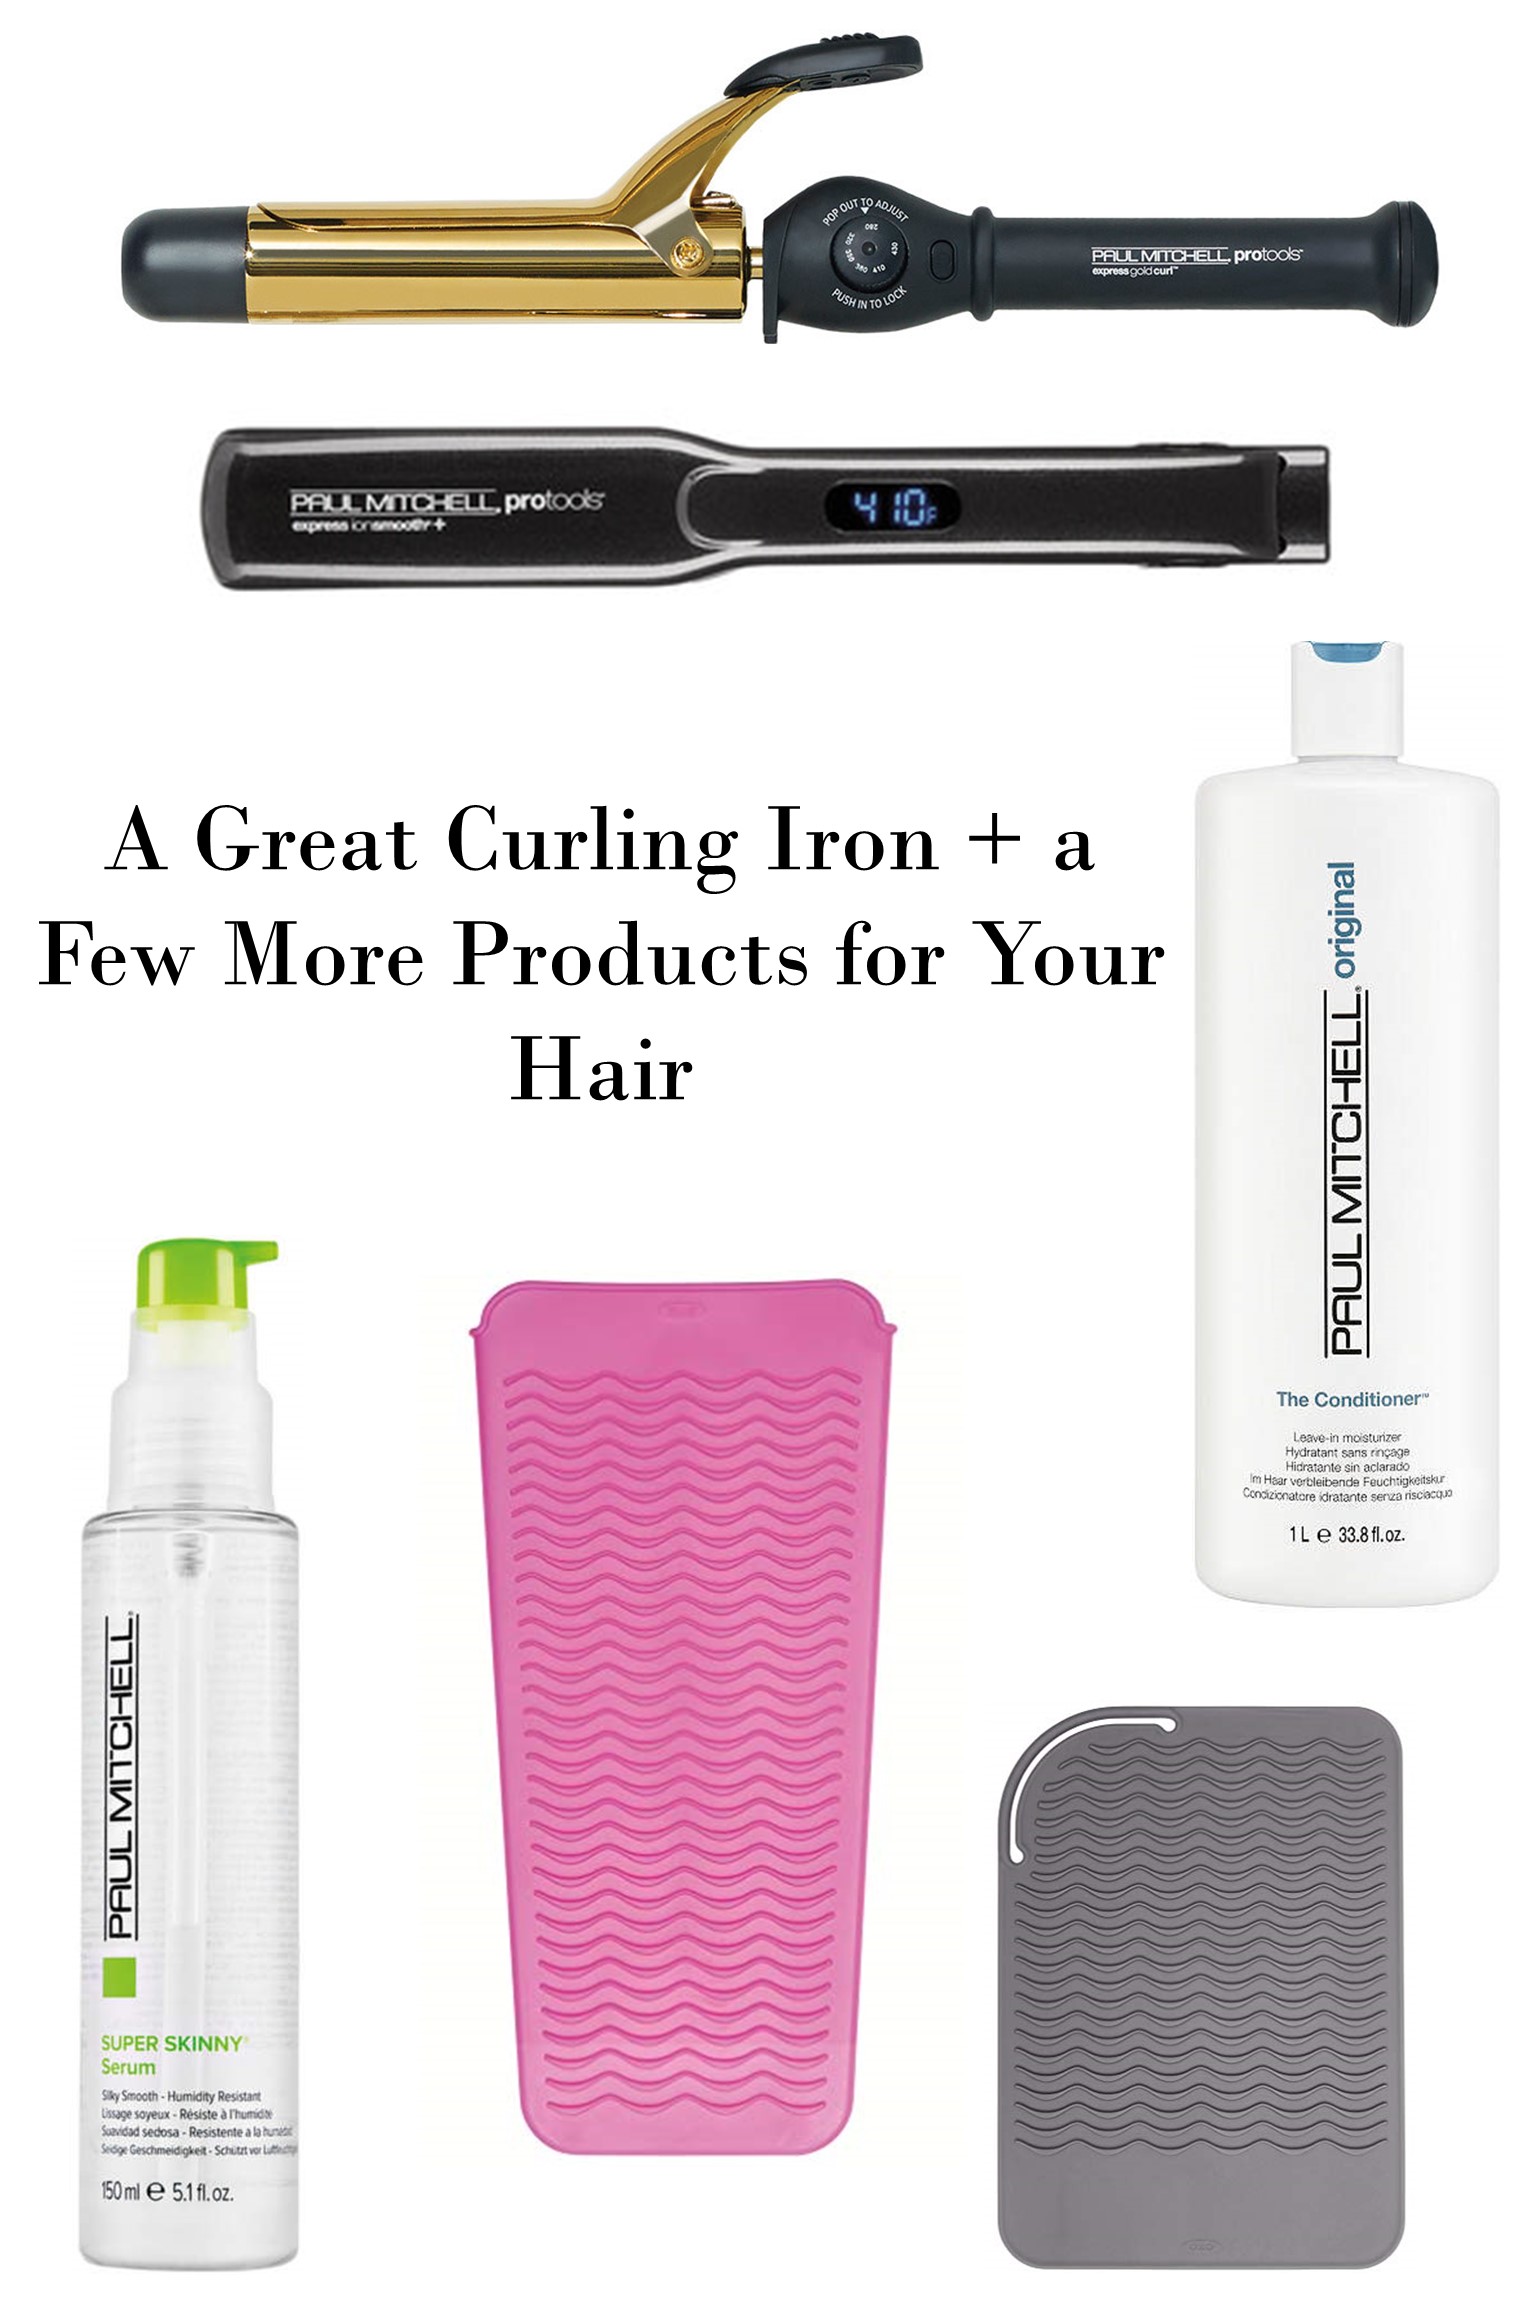 Product Pics of Paul Mitchell's Curling Iron, Flat Iron, Conditioner, and Skinny Serum